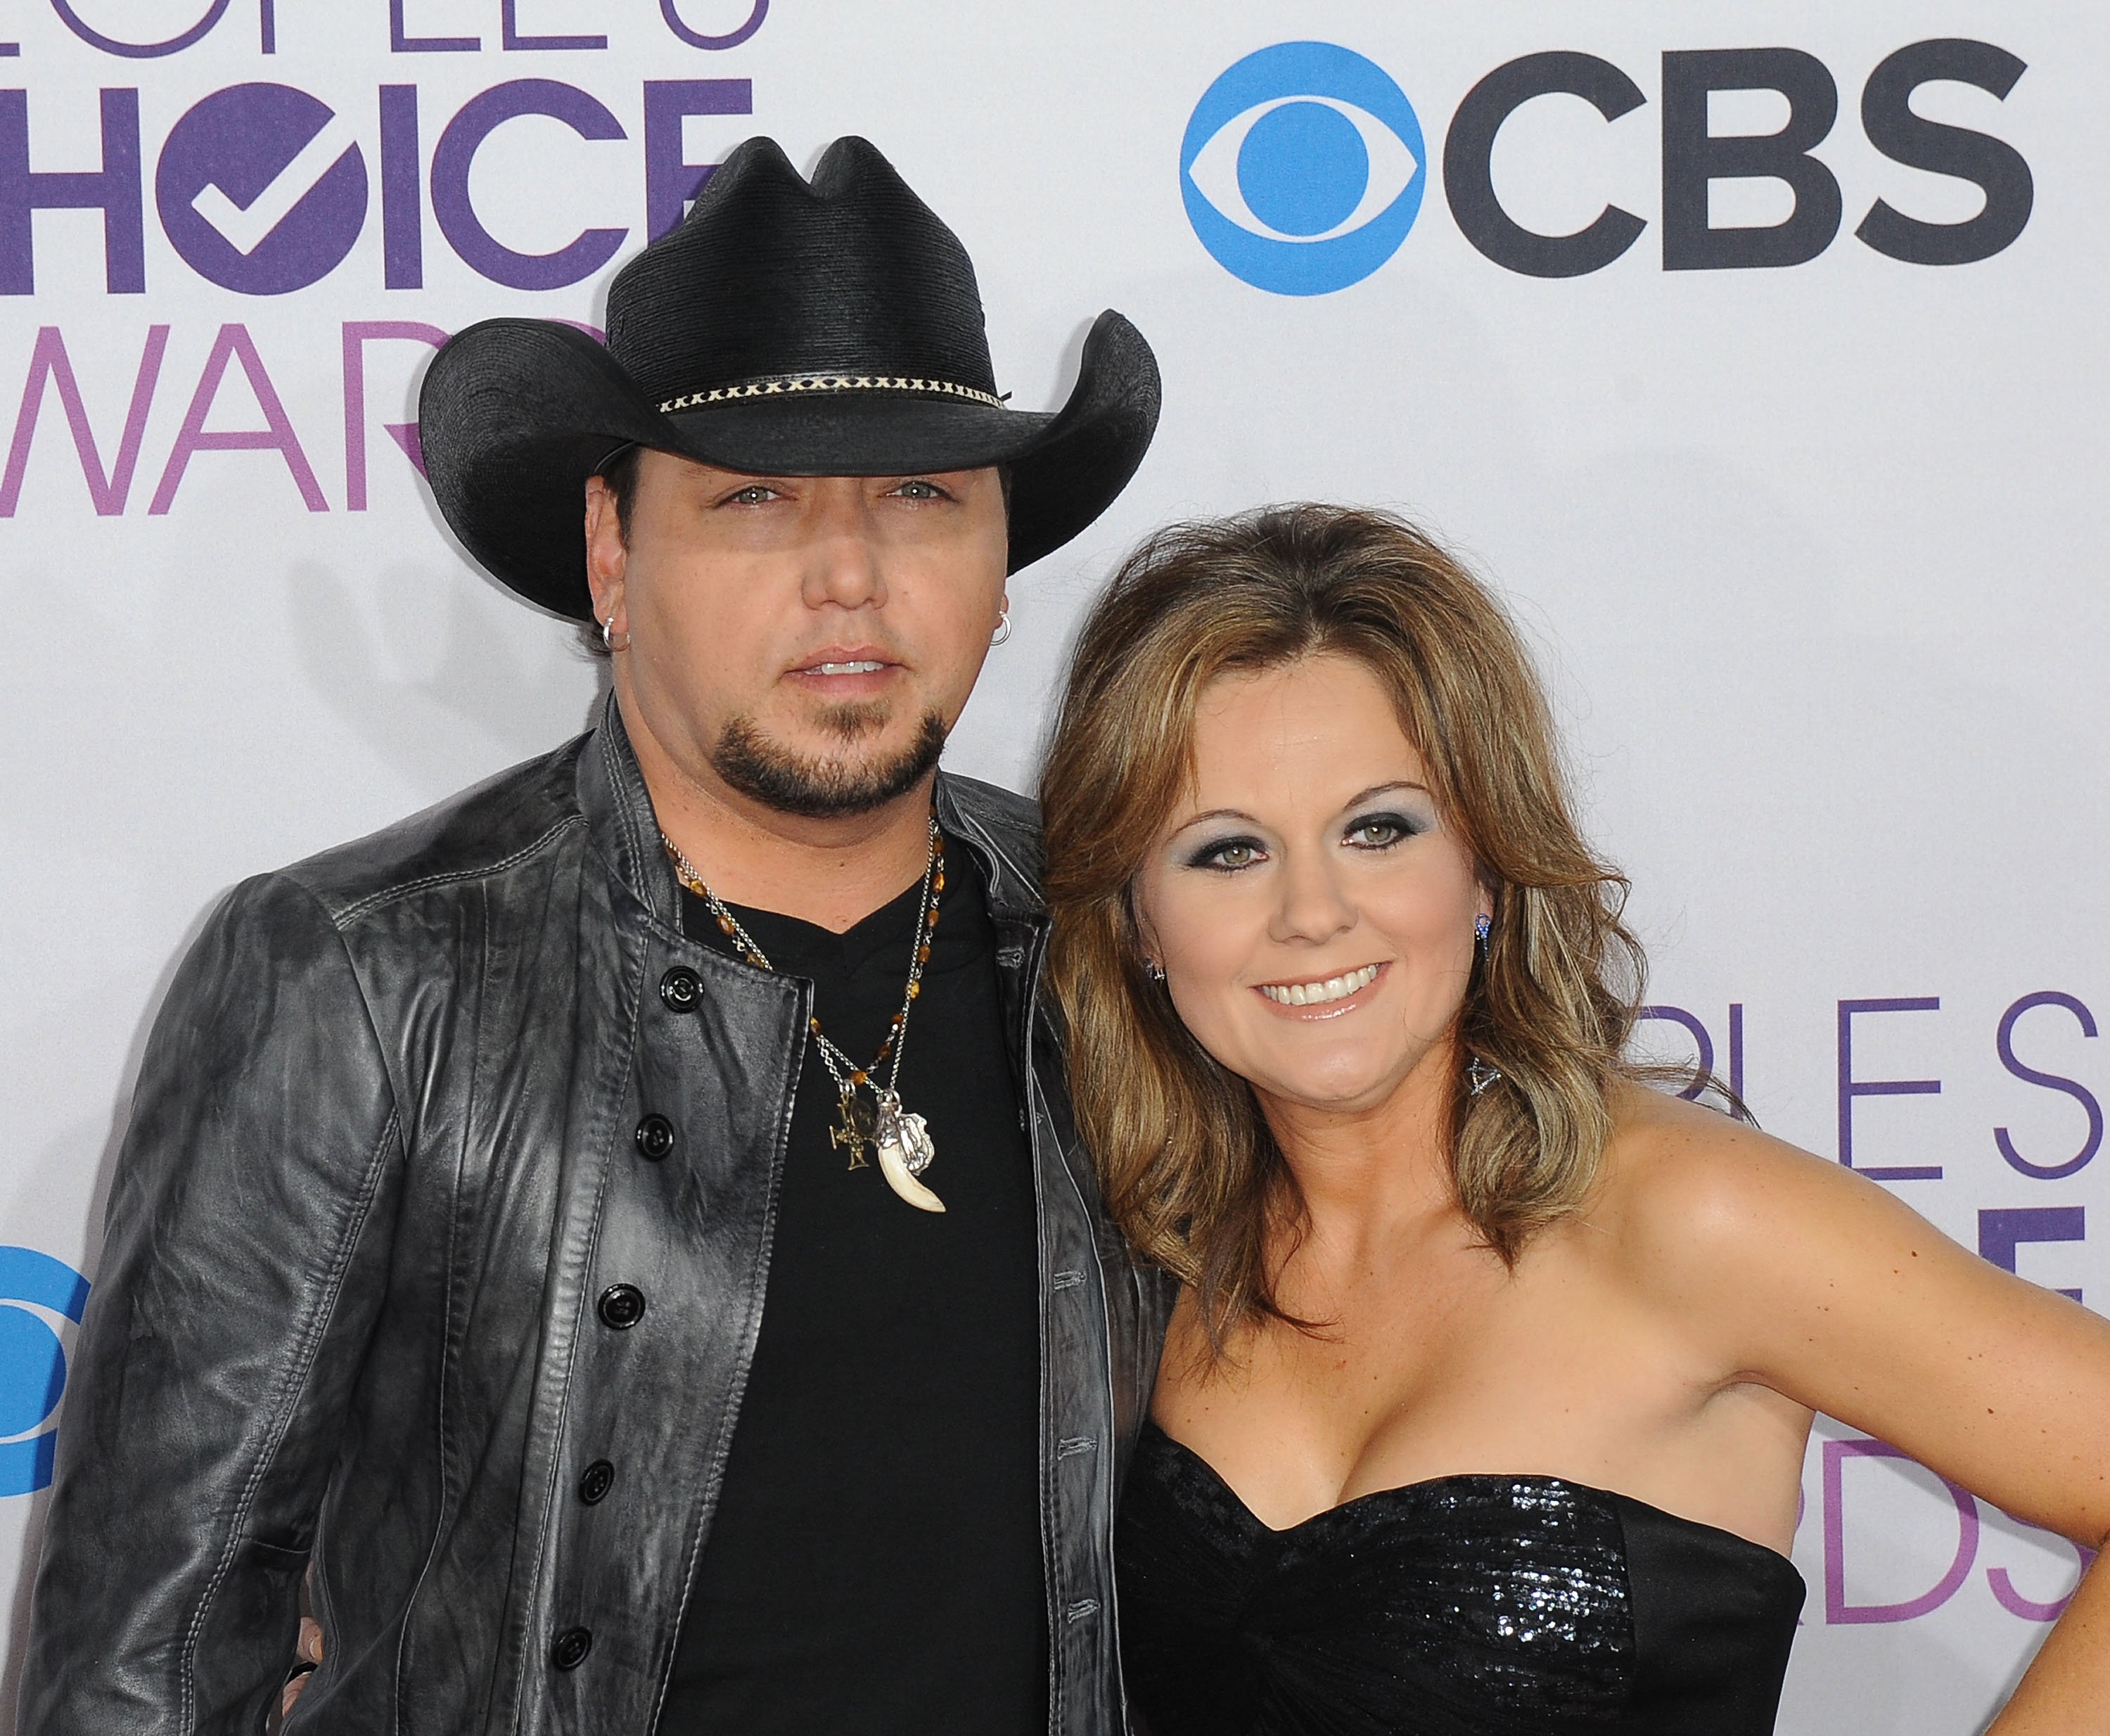 Jason Aldean and Jessica Ussery at the People's Choice Awards on January 9, 2013, in Los Angeles, California | Source: Getty Images